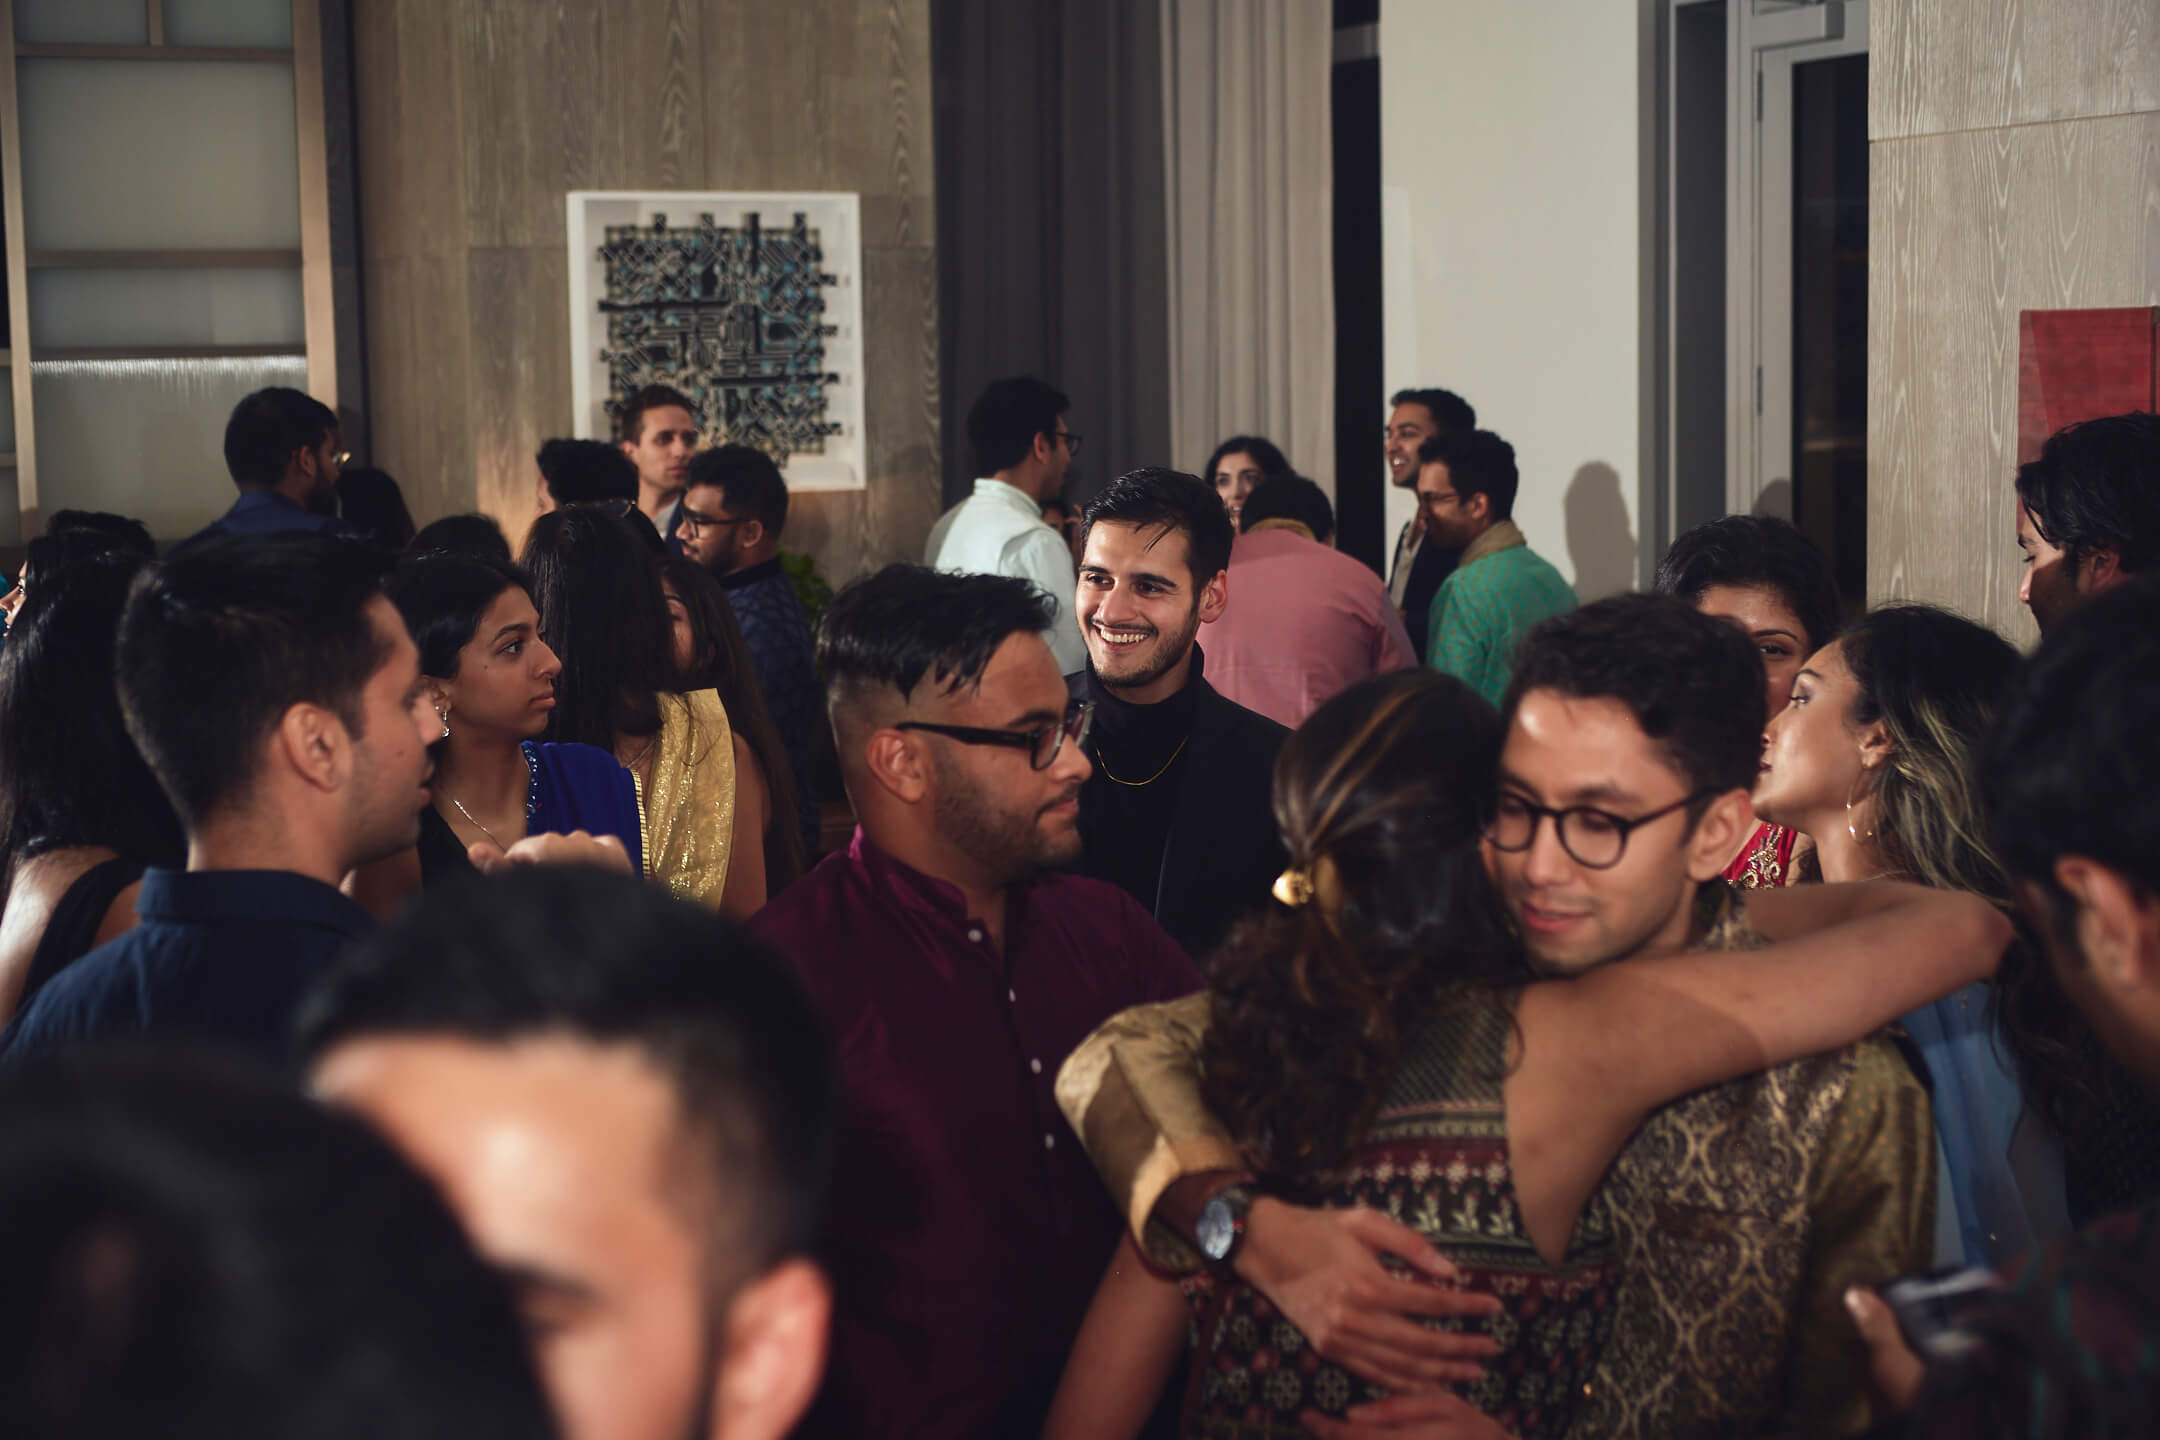 Sehal & Pranay - Diwali Celebration - Event Photography - Lifestyle Photography - Downtown Brooklyn, New York 